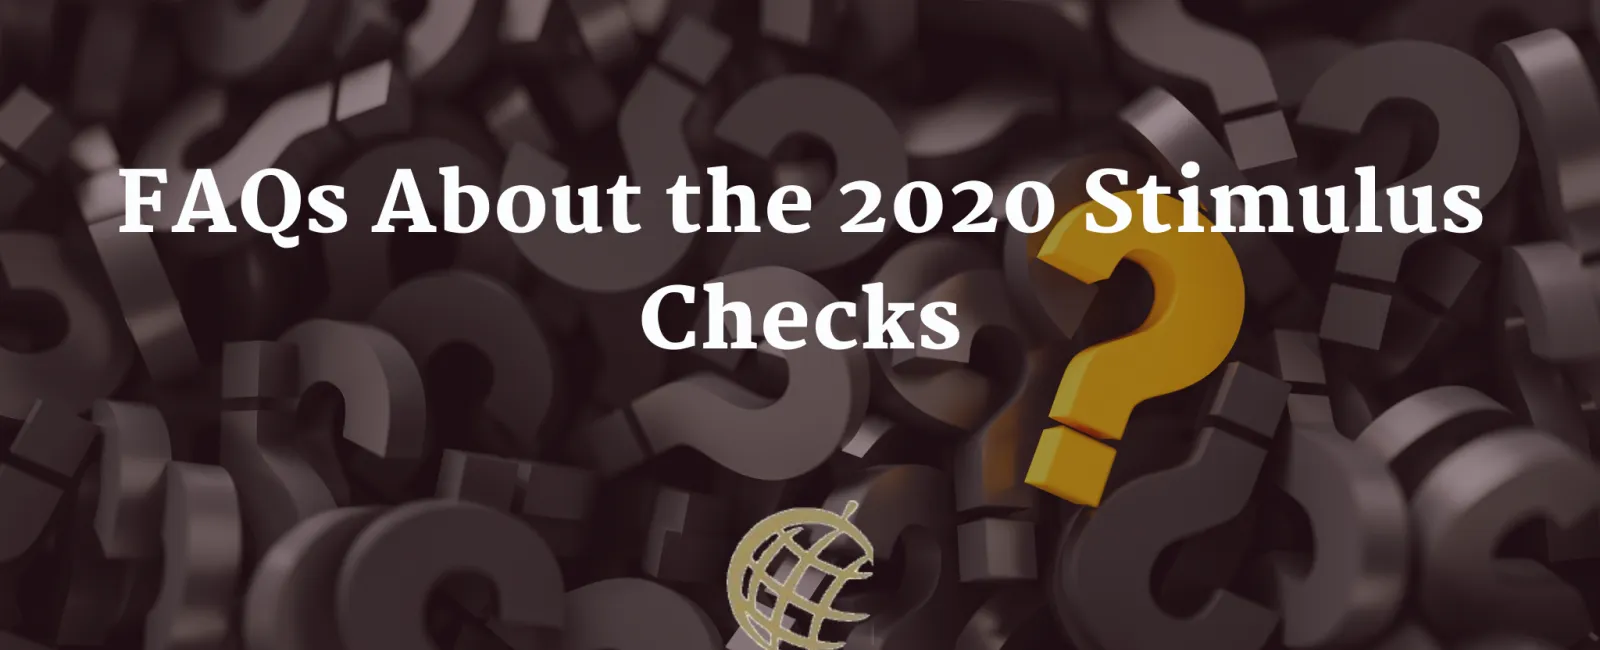 FAQs About the 2020 Stimulus Checks